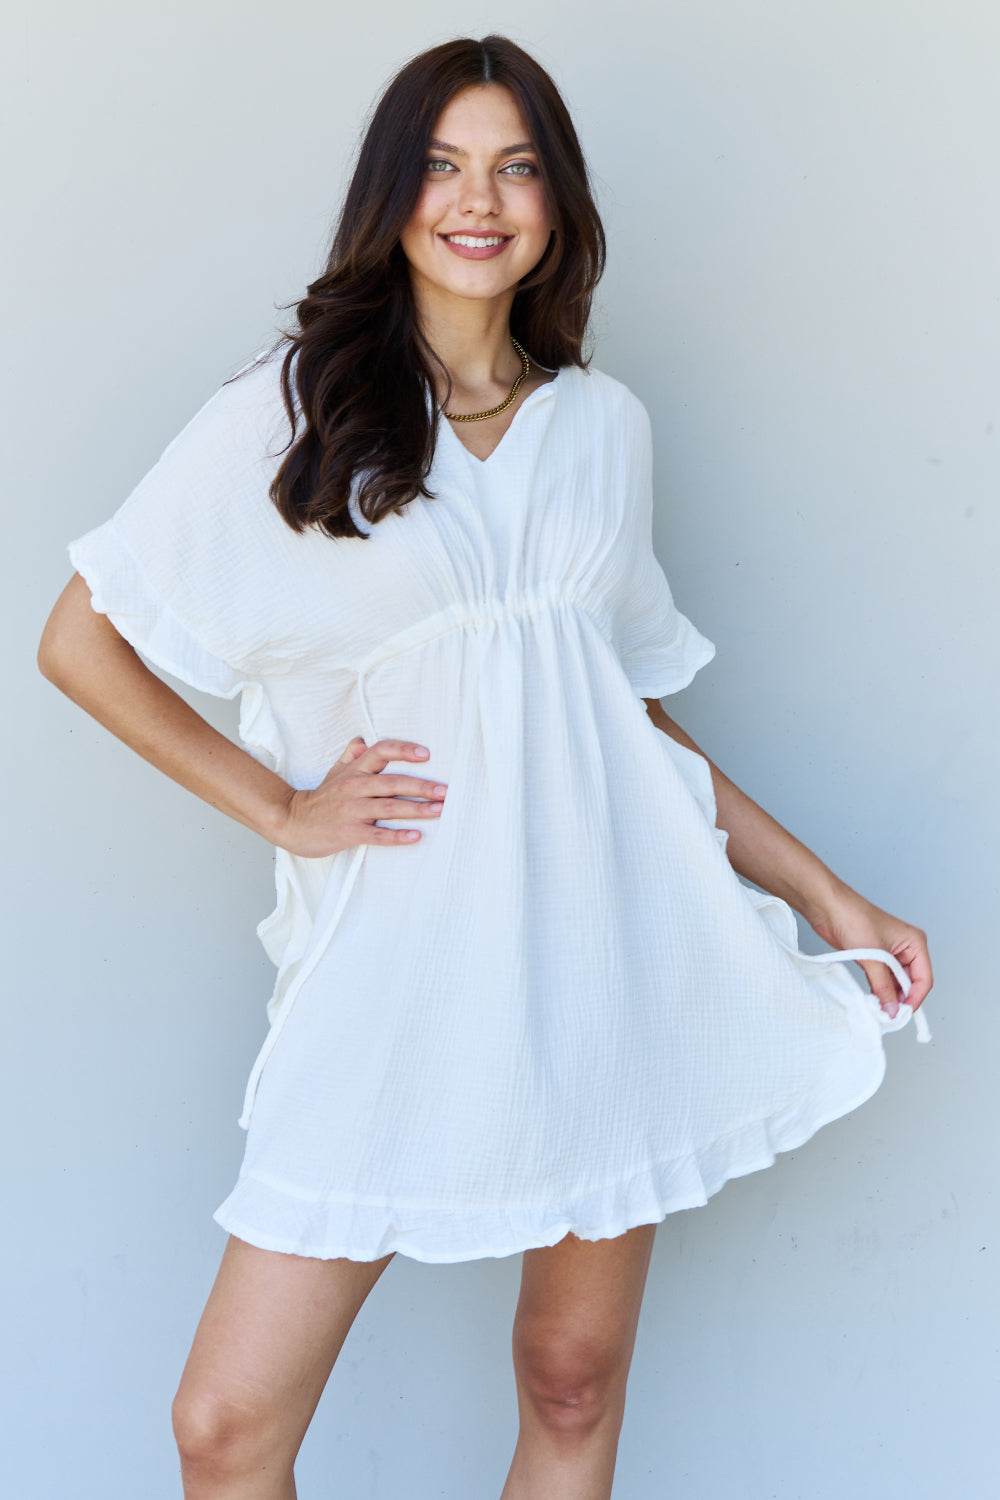 Ninexis Out Of Time Full Size Ruffle Hem Dress with Drawstring Waistband in White - Babbazon Dress